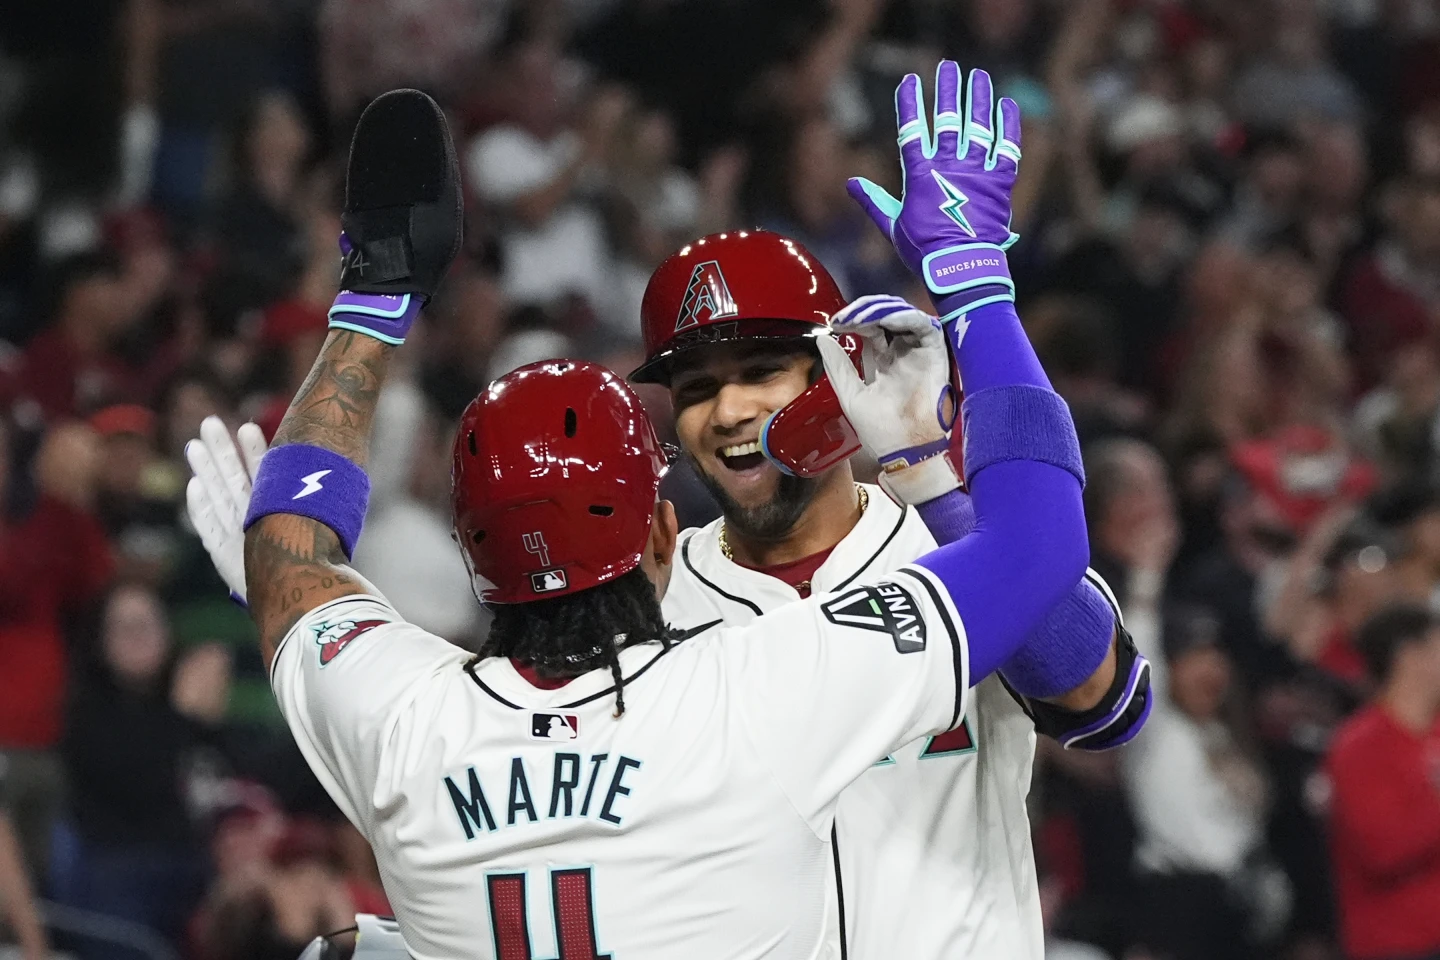 The Arizona Diamondbacks dominate the Colorado Rockies with 14 runs in the third inning, marking the highest number of runs scored in a single inning on opening day since 1900